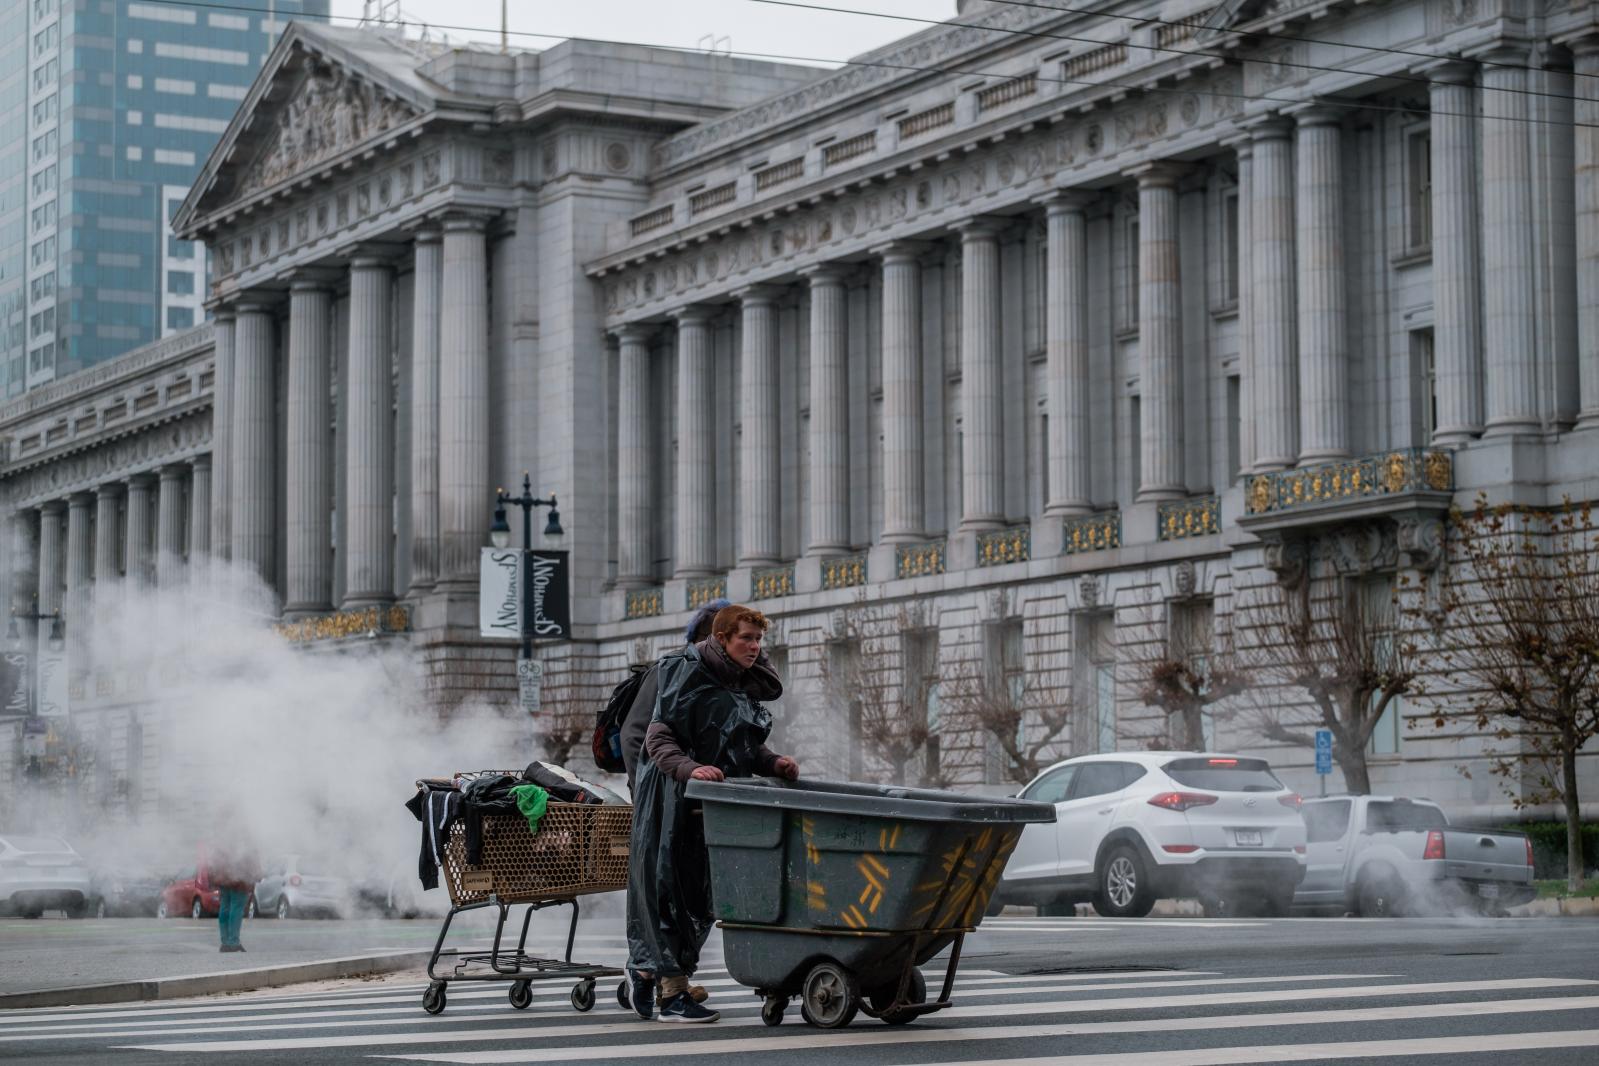 Homeless folks cross the street with their belongings near City Hall in San Francisco on Friday, January 8, 2021. After the events that unfolded at the Capitol building and the growing number of coronavirus cases many are left wondering if there is hope for the future.